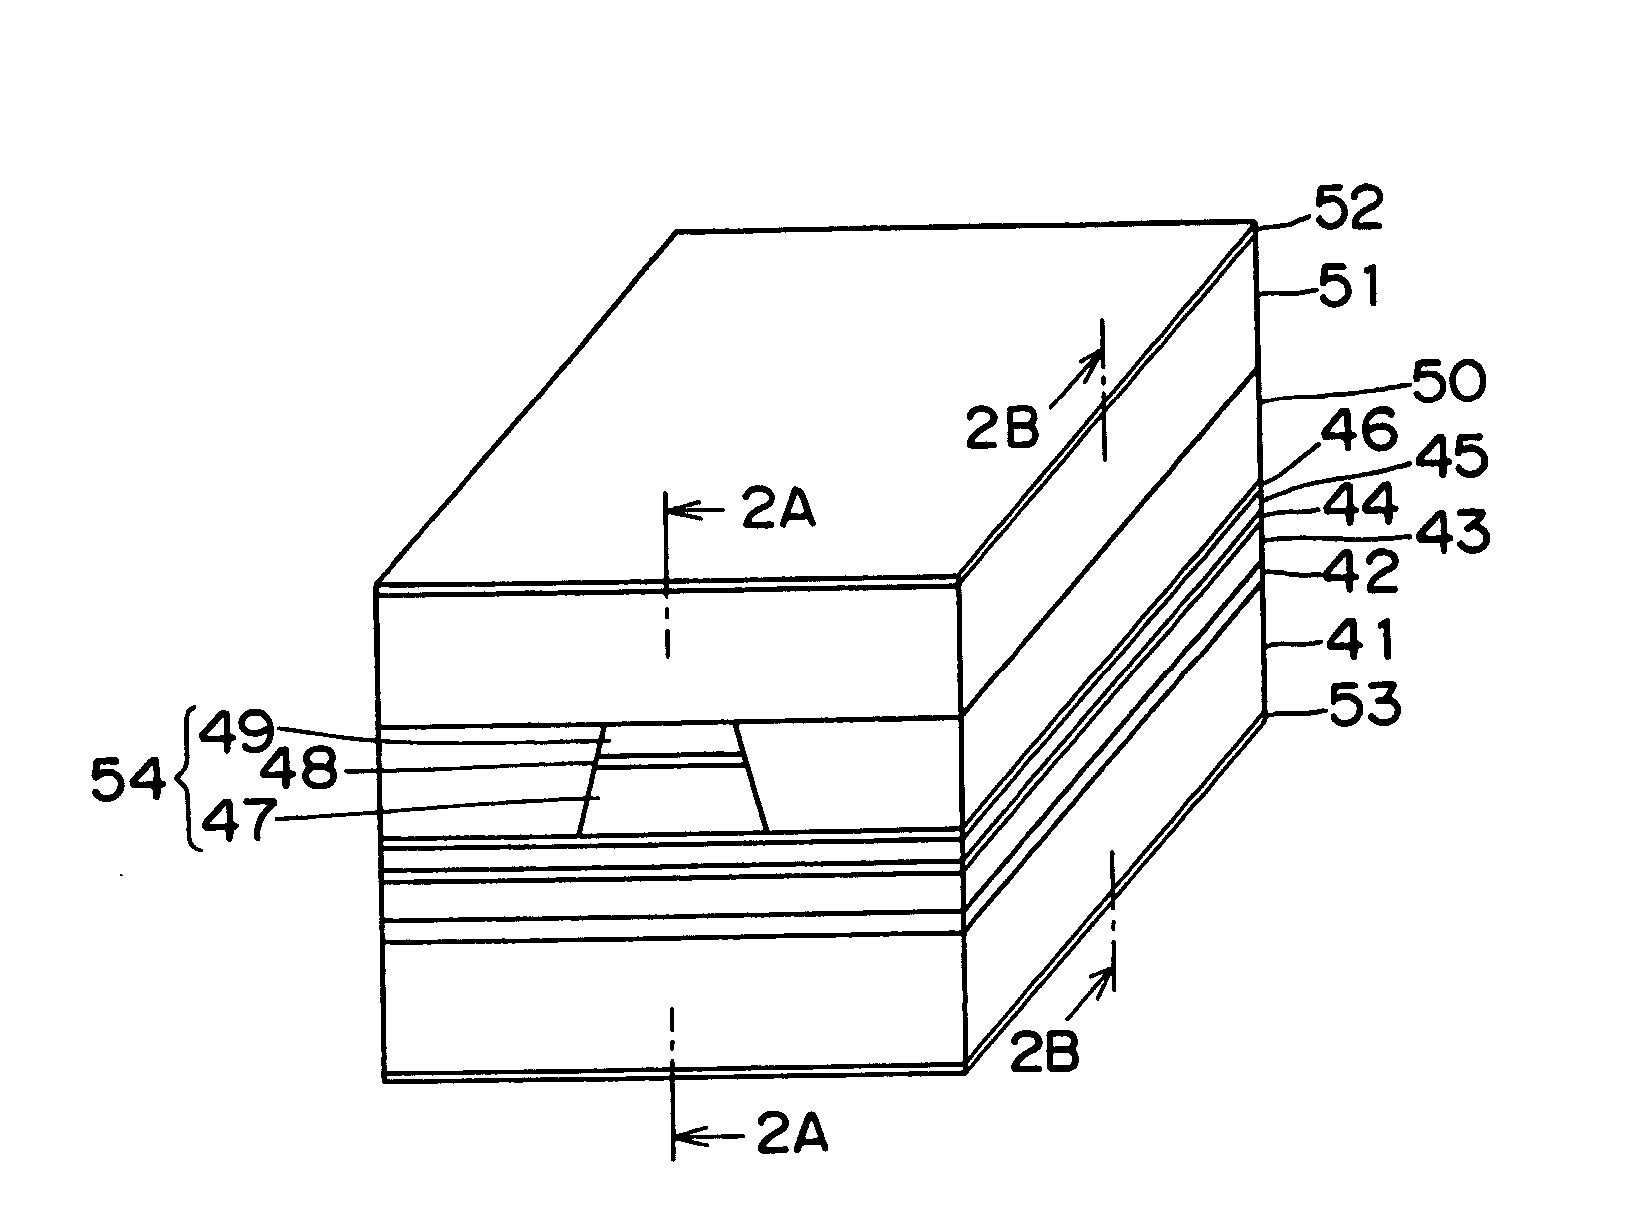 Semiconductor laser device and method of producing the same